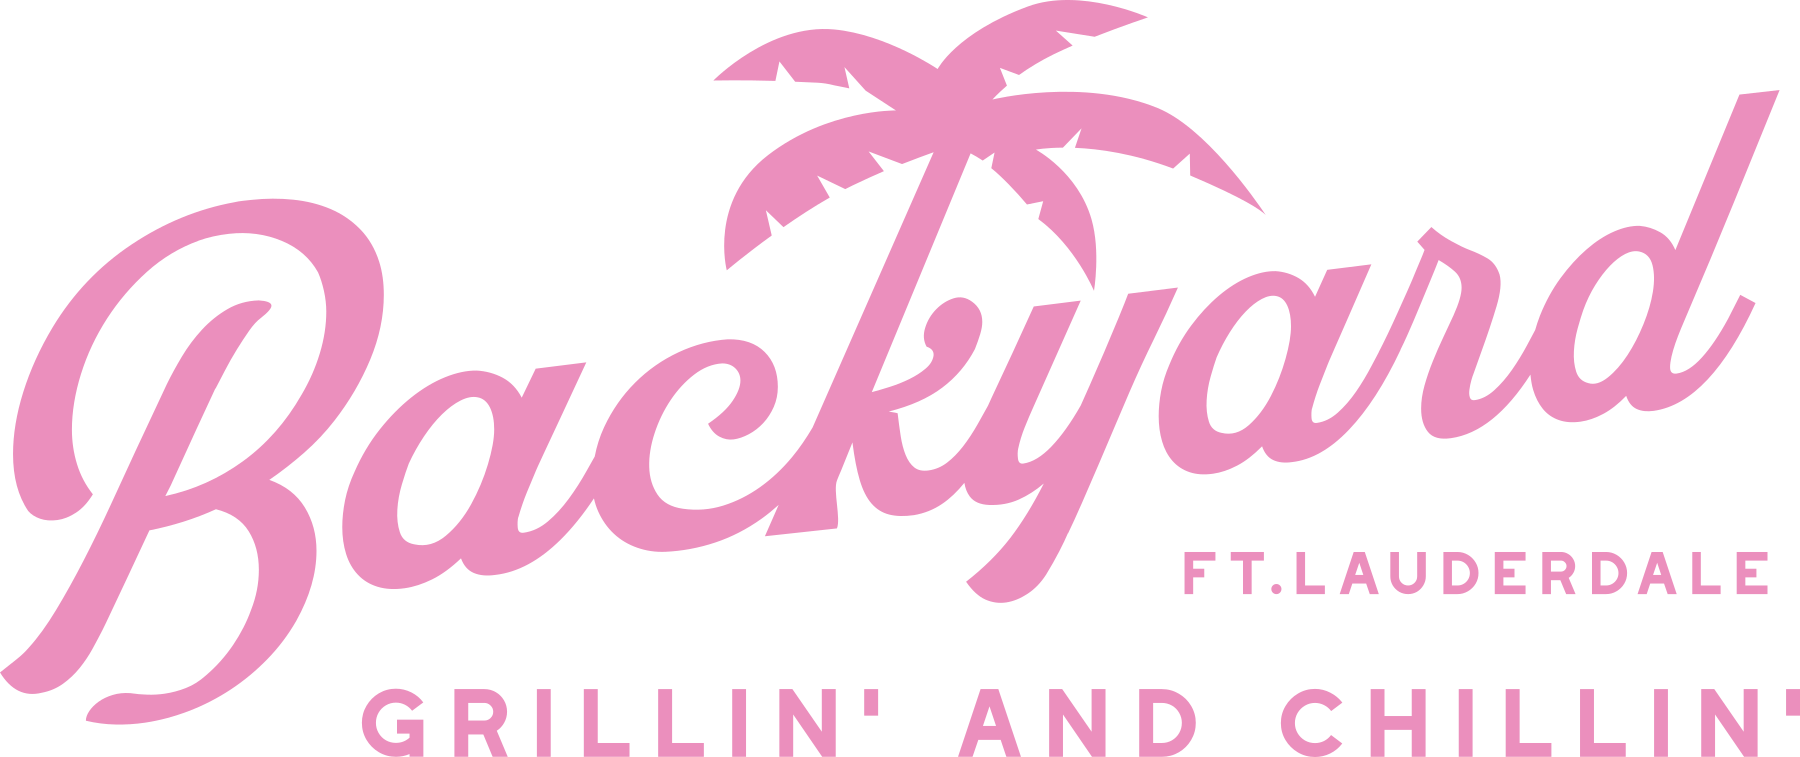 Backyard Ft. Lauderdale - Grillin' and Chillin' Logo